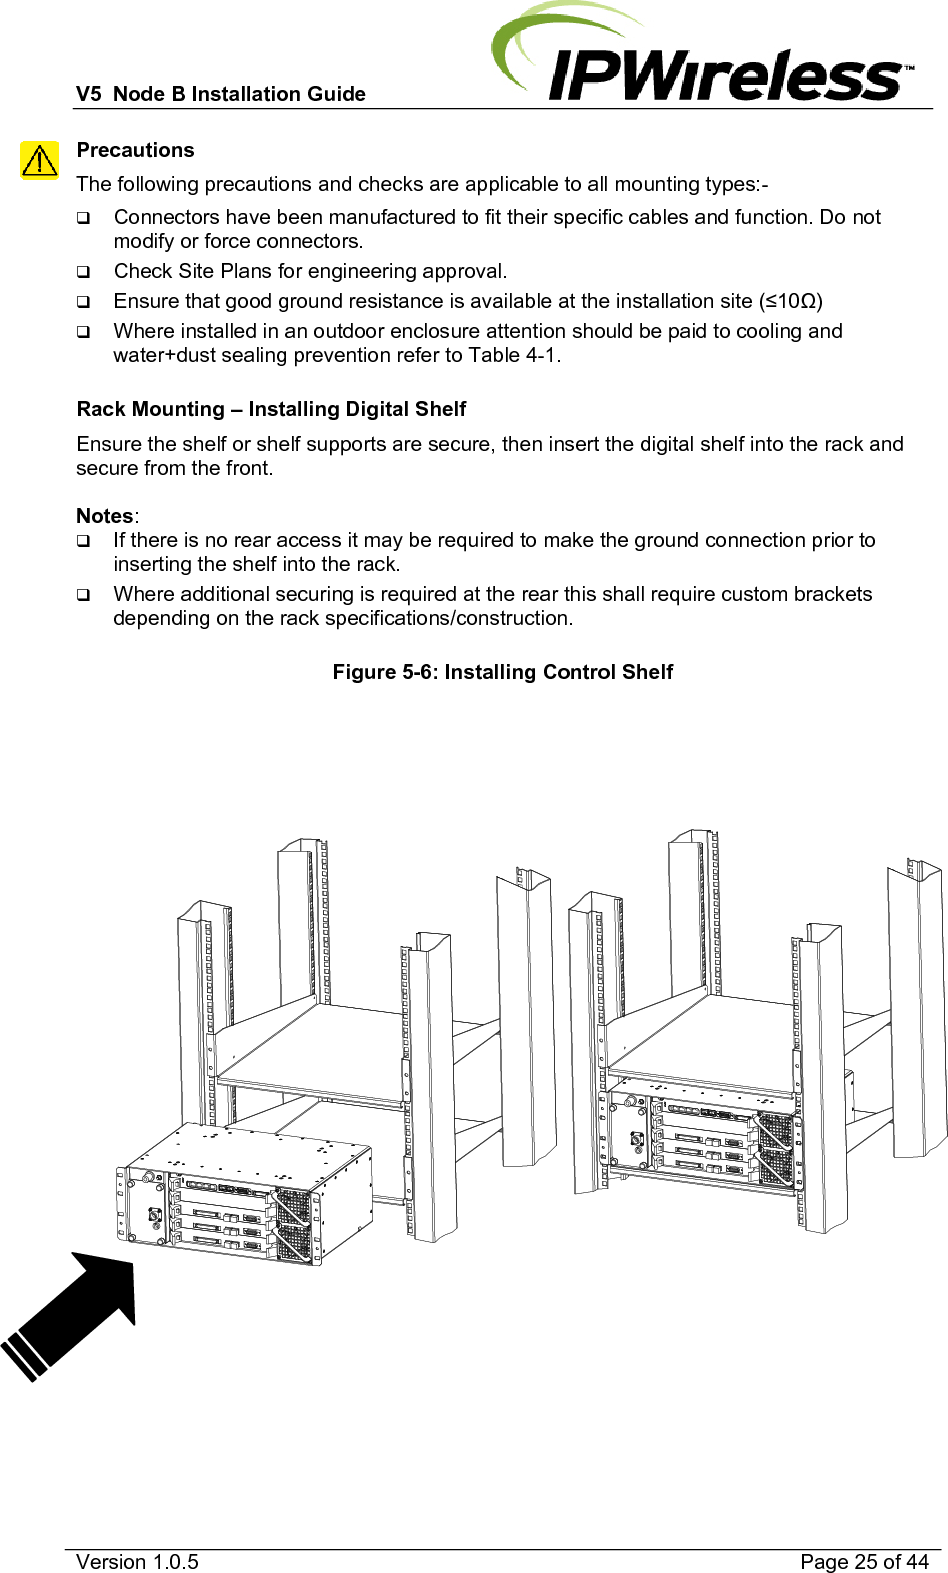 V5  Node B Installation Guide                           Version 1.0.5    Page 25 of 44 Precautions The following precautions and checks are applicable to all mounting types:-  Connectors have been manufactured to fit their specific cables and function. Do not modify or force connectors.  Check Site Plans for engineering approval.  Ensure that good ground resistance is available at the installation site (10)  Where installed in an outdoor enclosure attention should be paid to cooling and water+dust sealing prevention refer to Table 4-1.  Rack Mounting – Installing Digital Shelf Ensure the shelf or shelf supports are secure, then insert the digital shelf into the rack and secure from the front.  Notes:   If there is no rear access it may be required to make the ground connection prior to inserting the shelf into the rack.  Where additional securing is required at the rear this shall require custom brackets depending on the rack specifications/construction.  Figure 5-6: Installing Control Shelf              